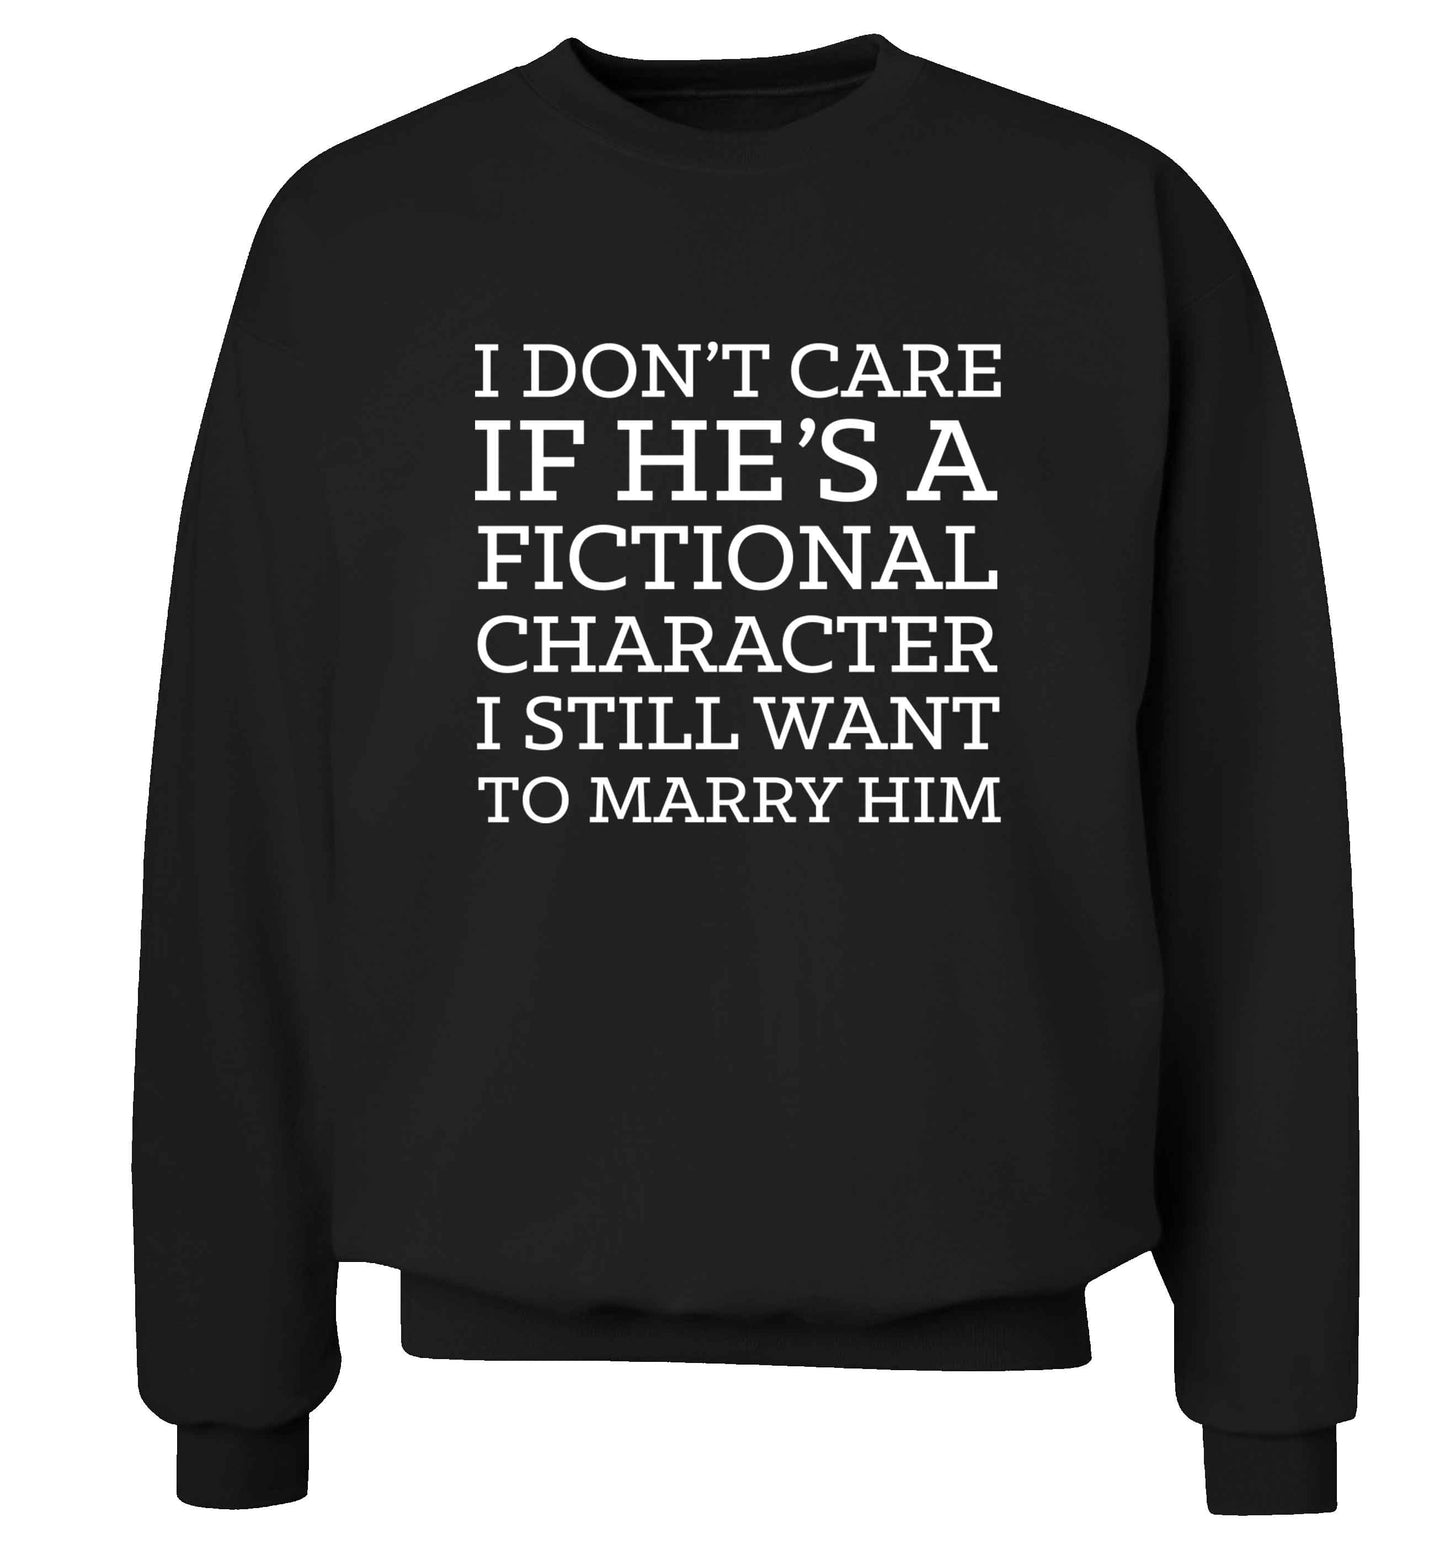 I don't care if he's a fictional character I still want to marry him adult's unisex black sweater 2XL